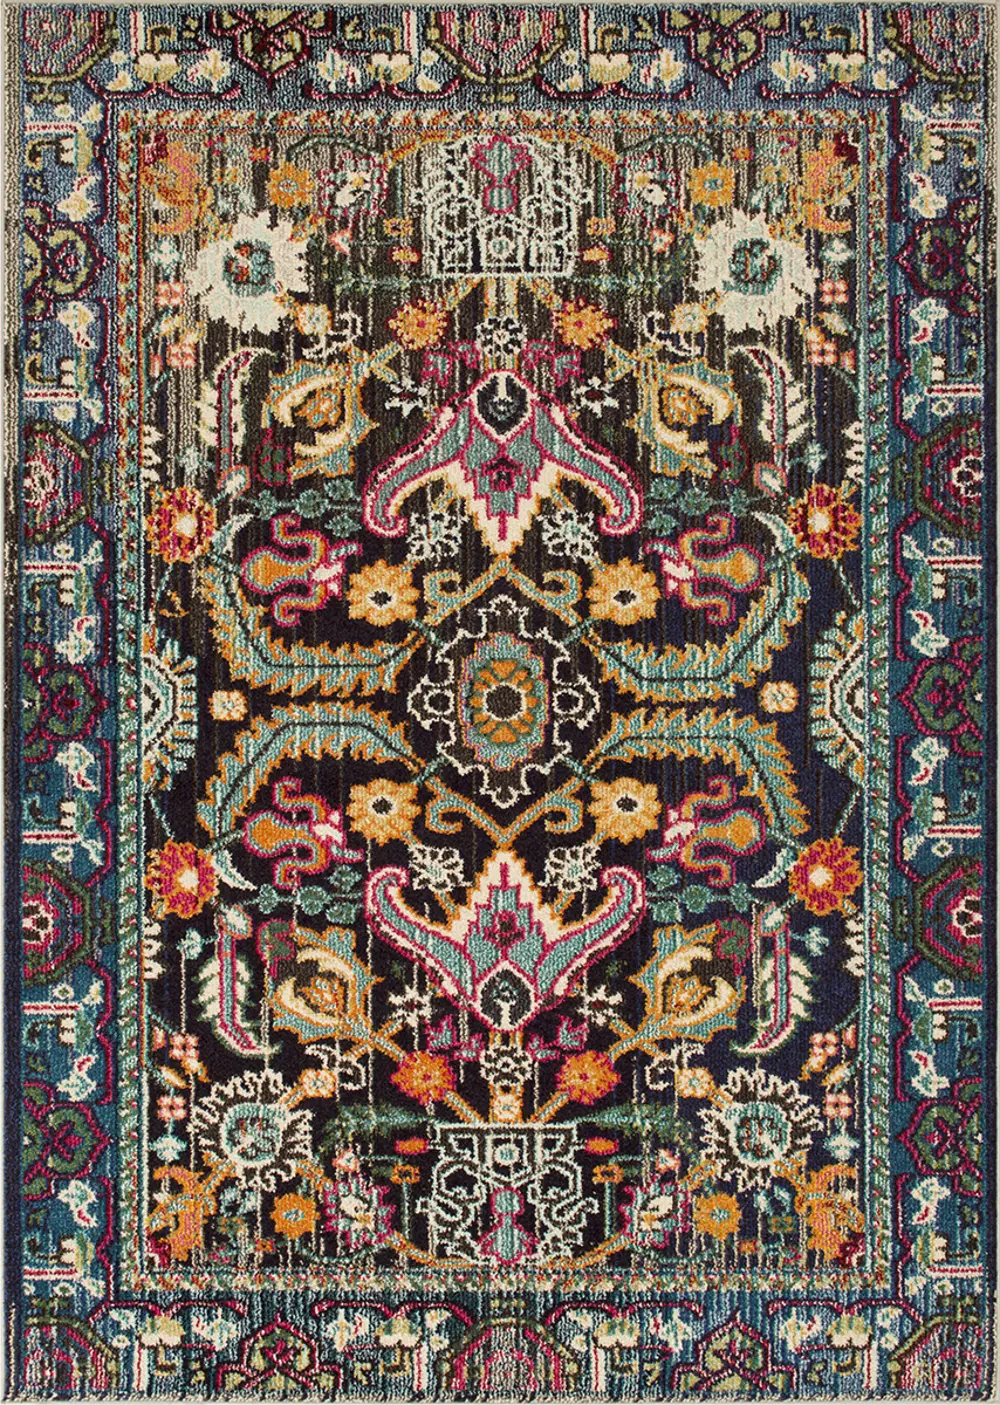 7 x 10 Large Multi-Colored Area Rug - Expressions-1